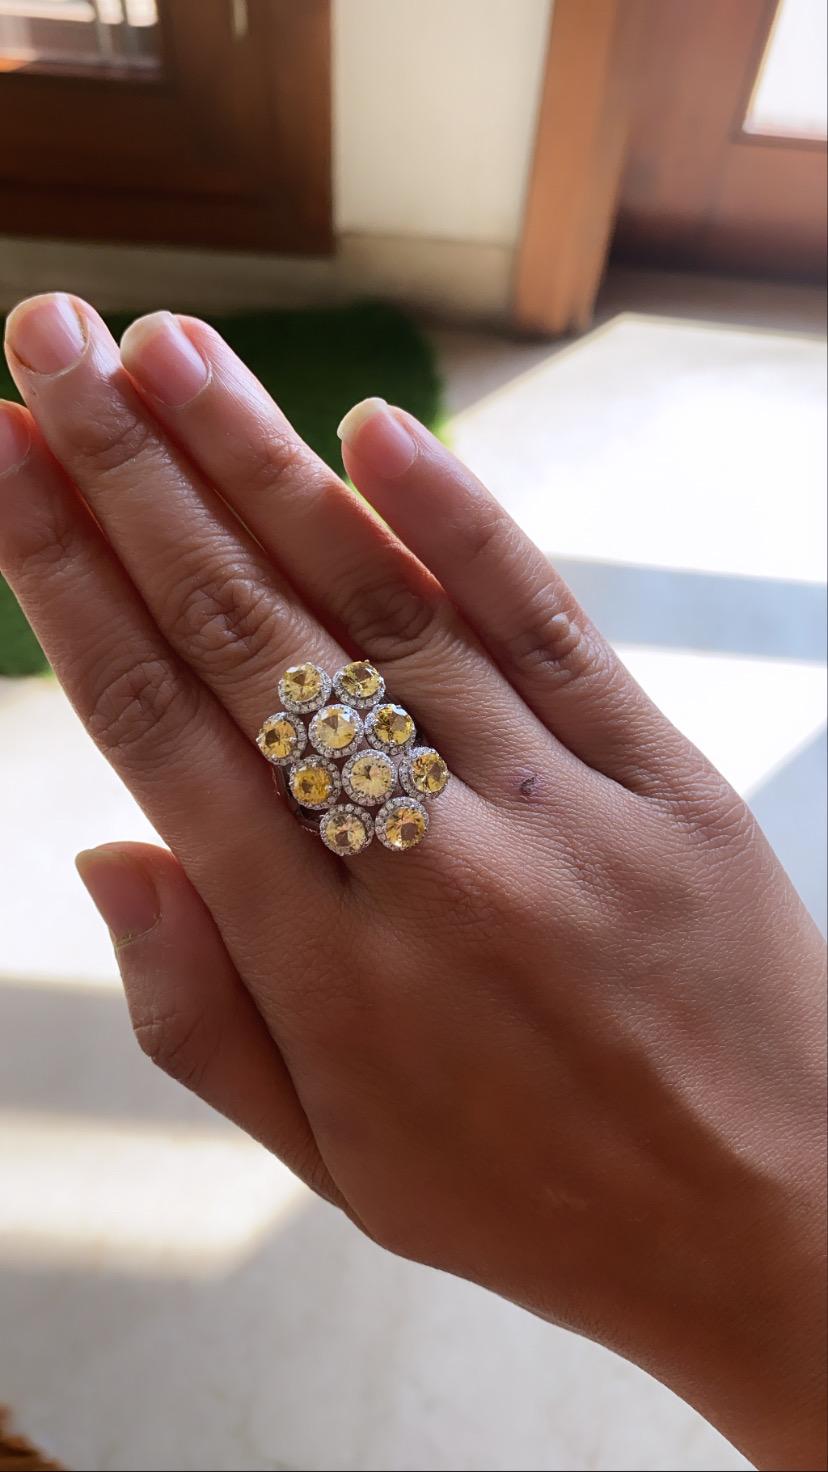 A beautiful cocktail ring set in 18k white gold with yellow sapphire and diamonds . The yellow sapphire weight is 5.13 carats , diamond weight is .67 carats and net gold weight is 10.995 grams. The ring dimensions in cm 2.8 x 2 x 2.5 (LXWXH). US